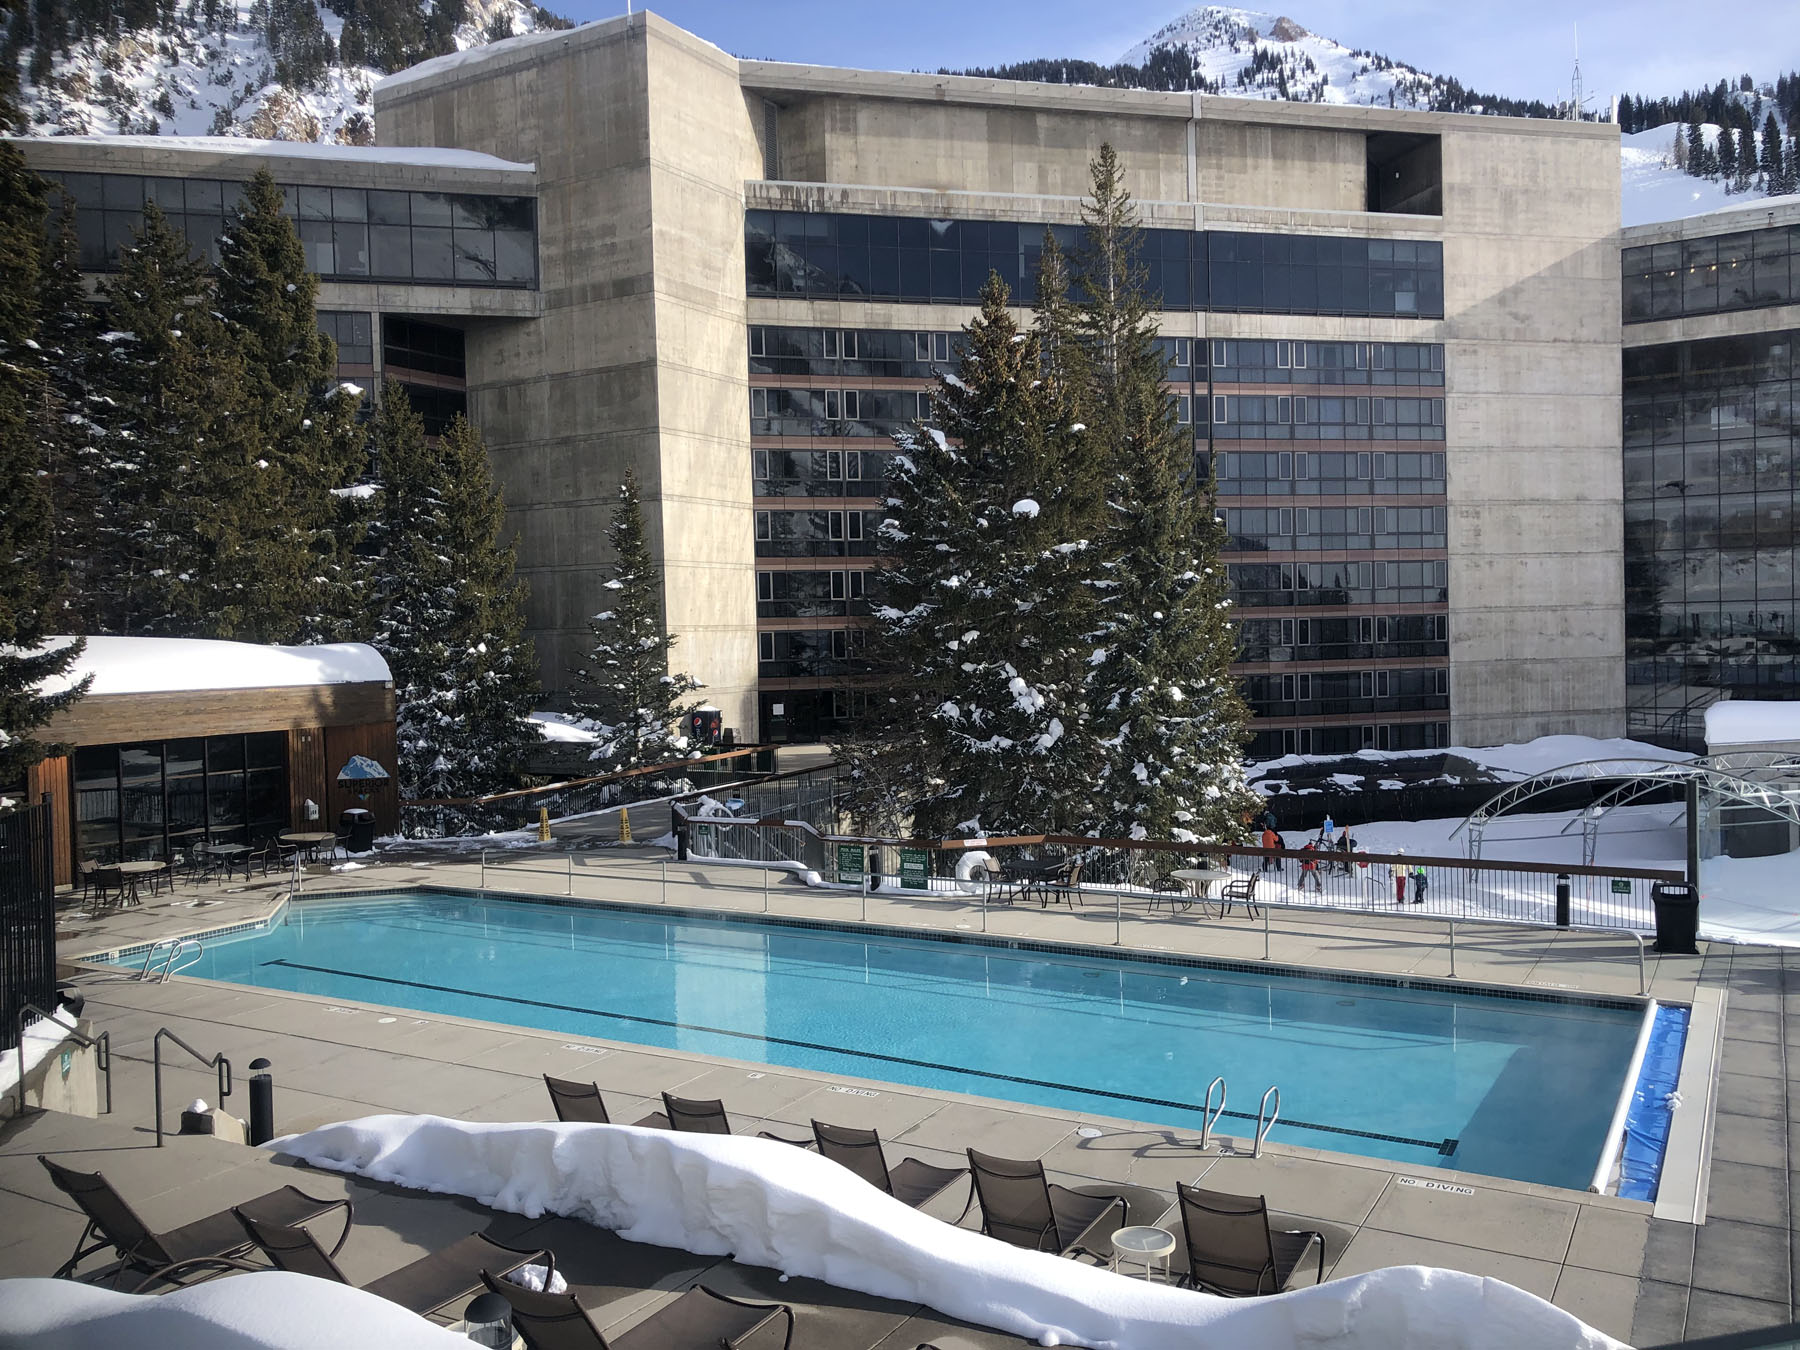 Cliff Lodge at Snowbird | TheLuxuryVacationGuide